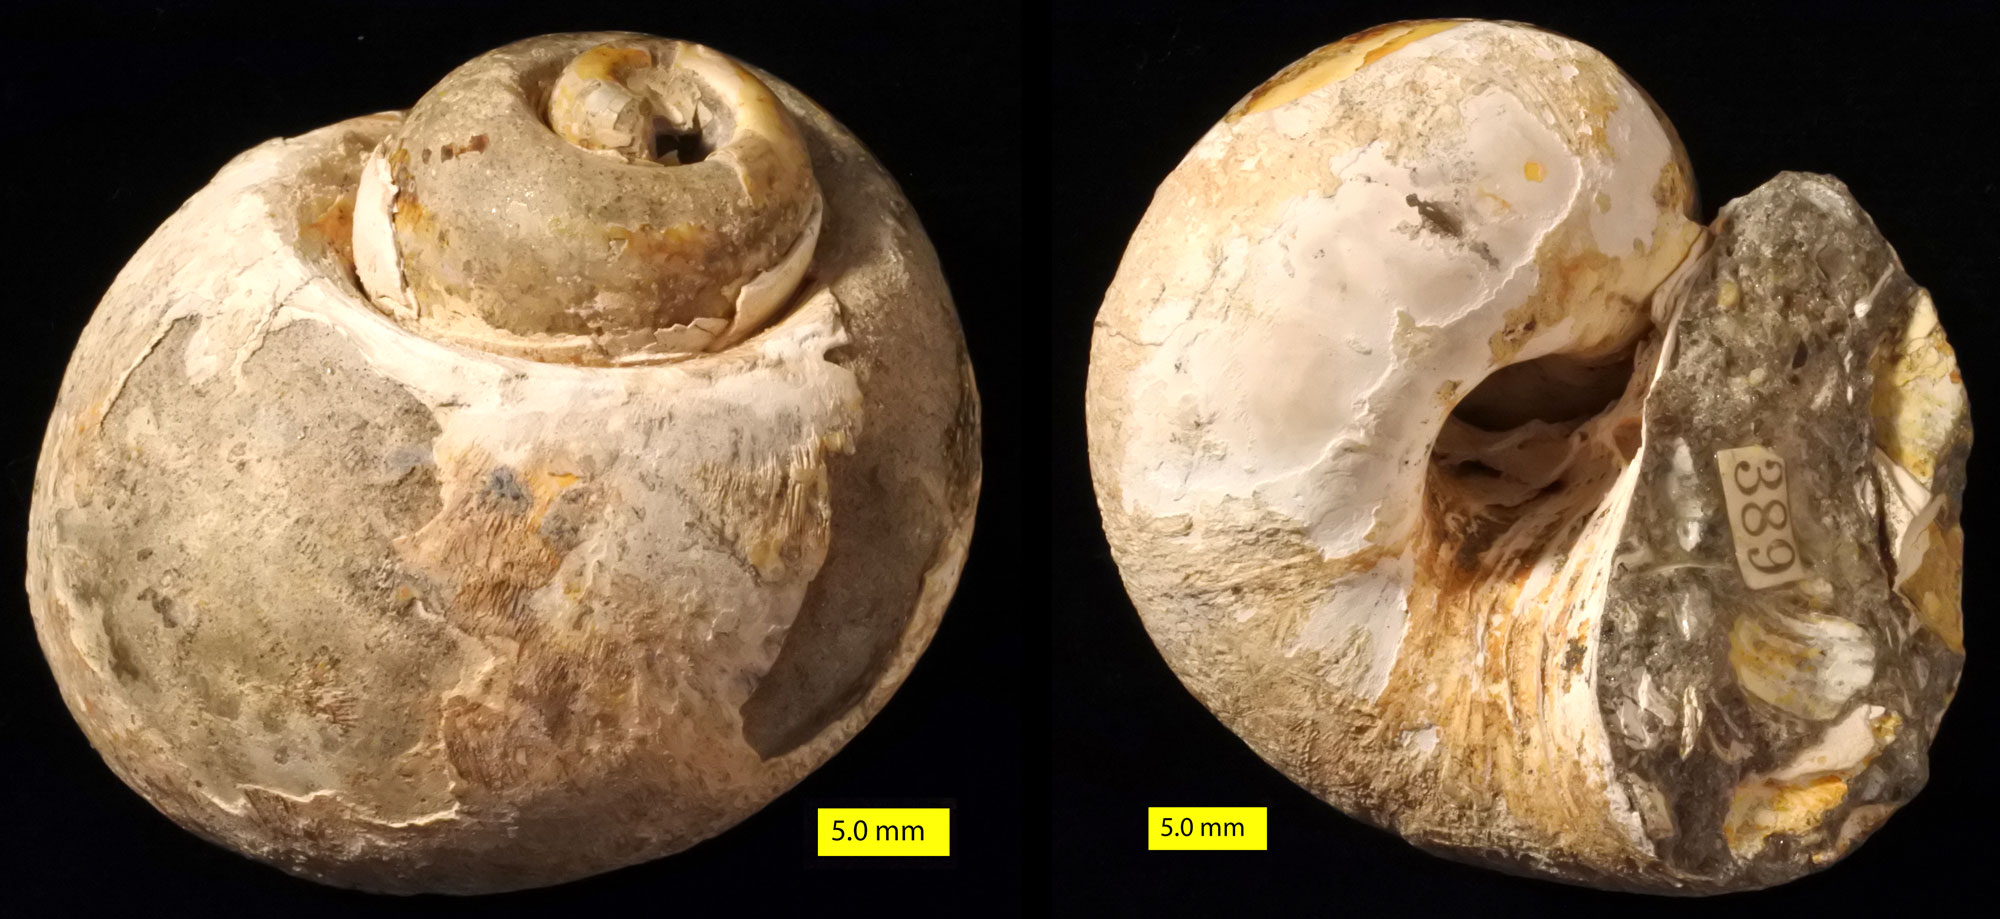 Two views of a fossil moon snail shell from the Pliocene of California. The left view shows the apex of the shell from an oblique angle. The right view shows the aperture (opening) of the shell. The shell is smooth and has a low spire, being perhaps slightly wider than long. Overall, the shell is nearly spherical in shape.